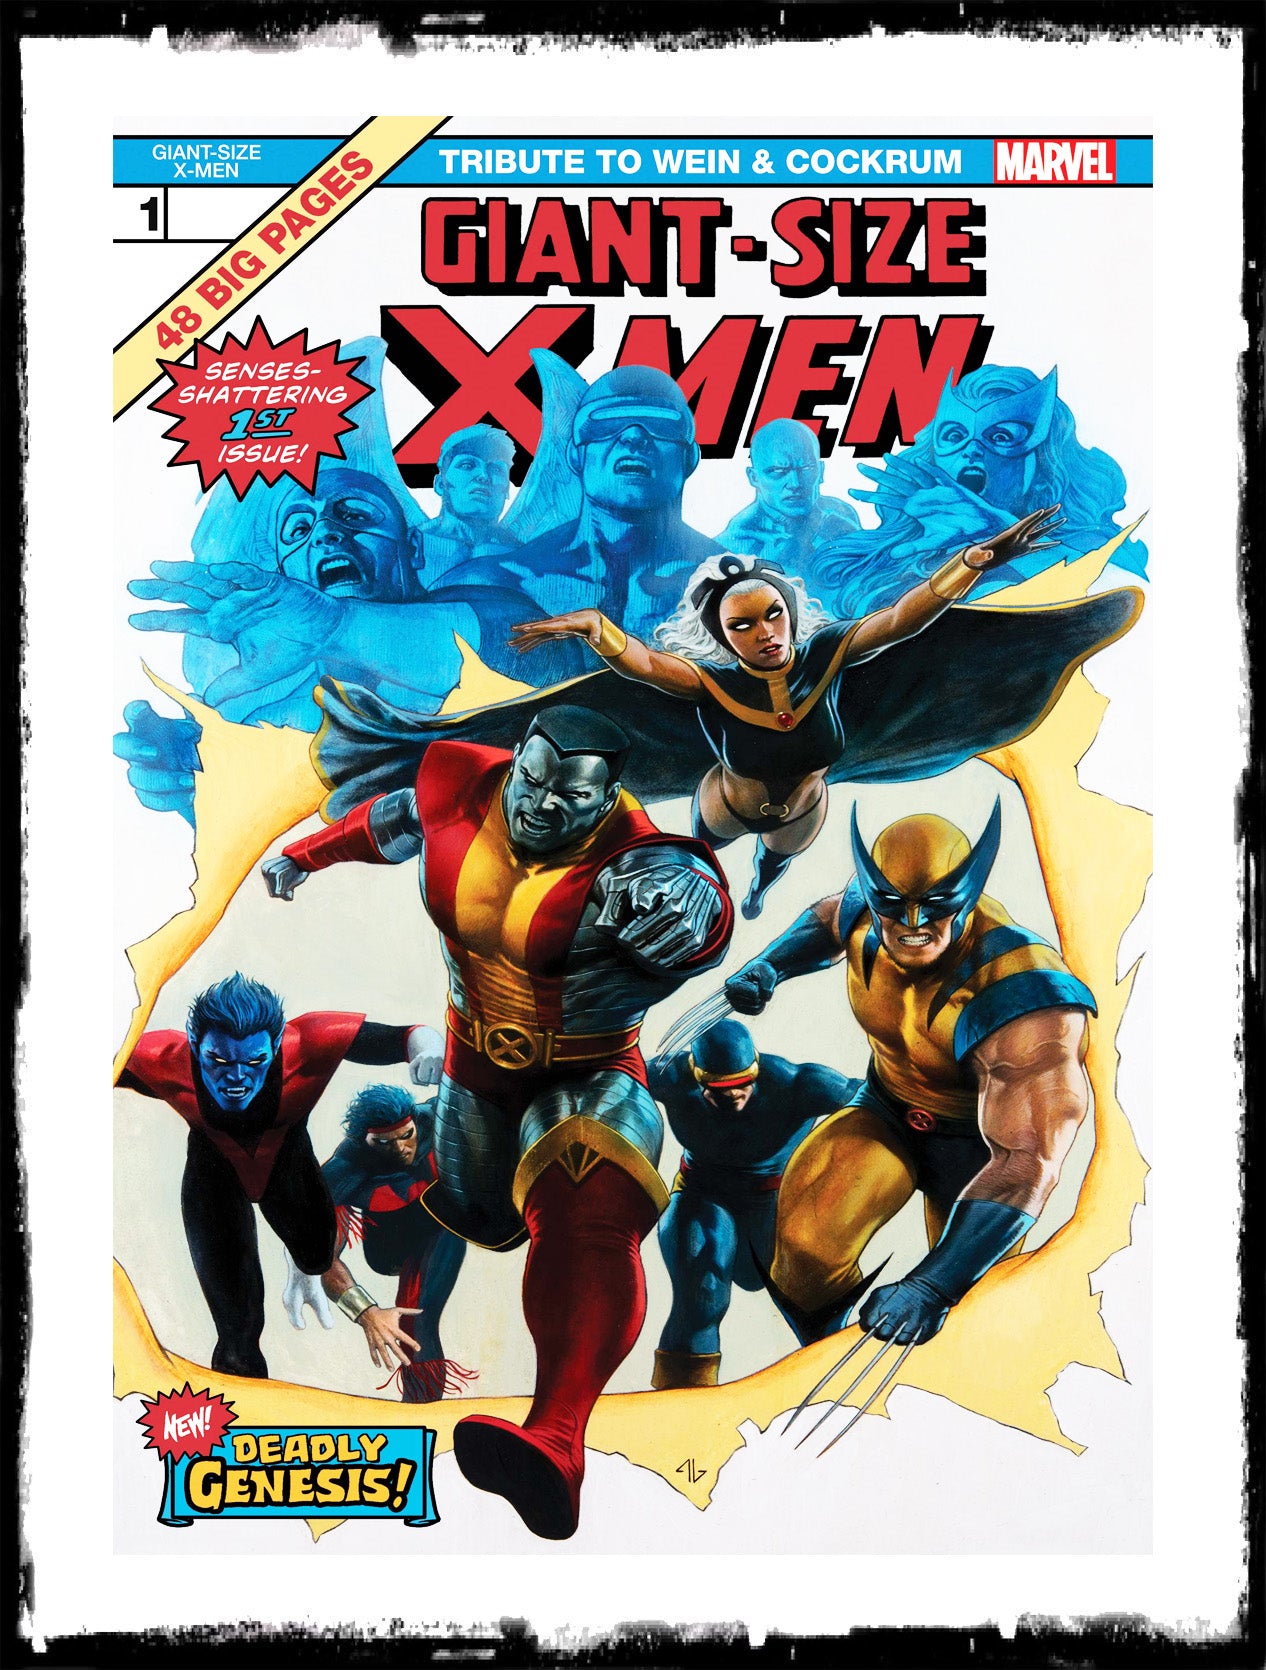 GIANT-SIZE X-MEN - #1 TRIBUTE TO LEN WEIN & DAVE COCKRUM - ADI GRANOV COVER (2020 - NM)